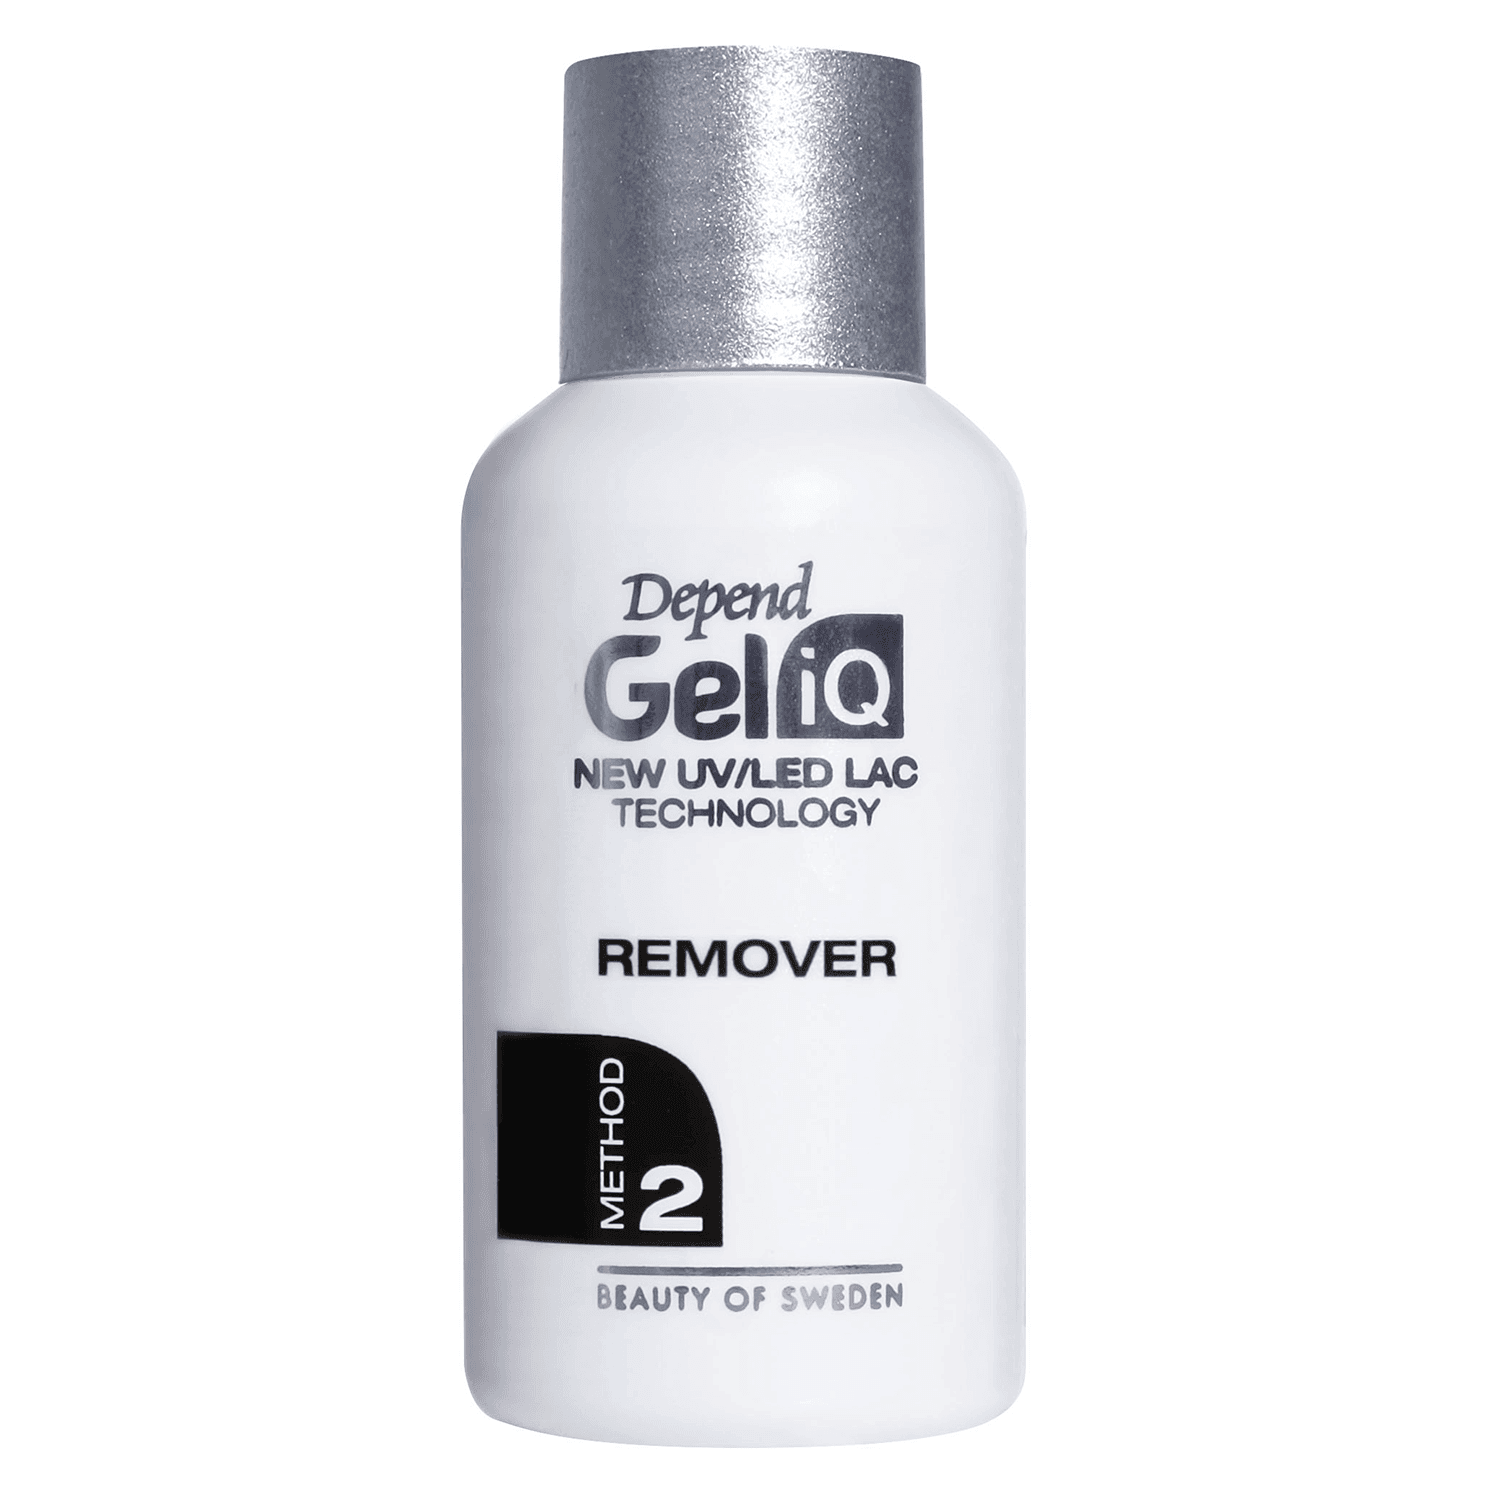 Gel iQ Cleanser & Remover - Remover Method 2